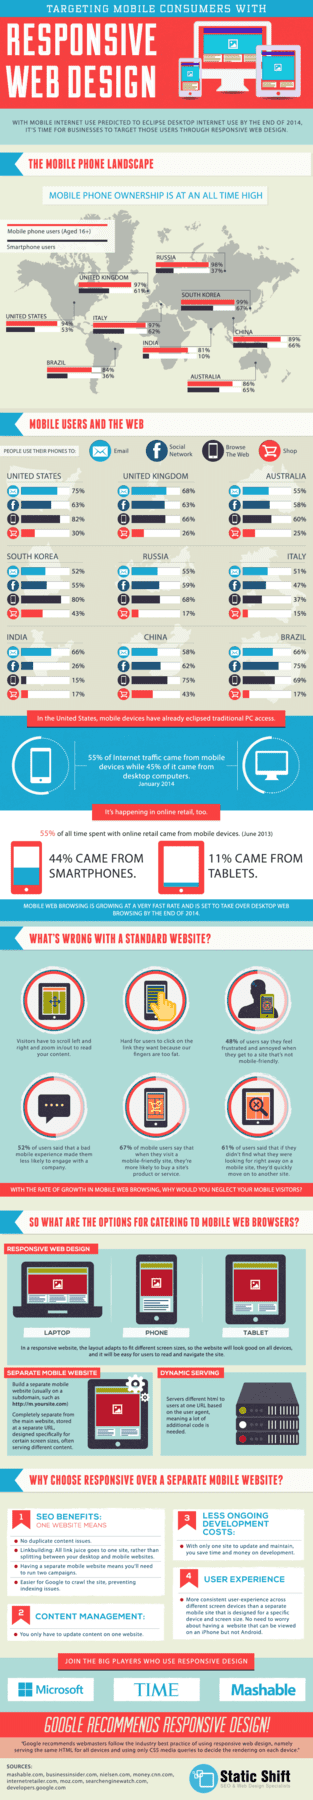 Why choose responsive web design infographic